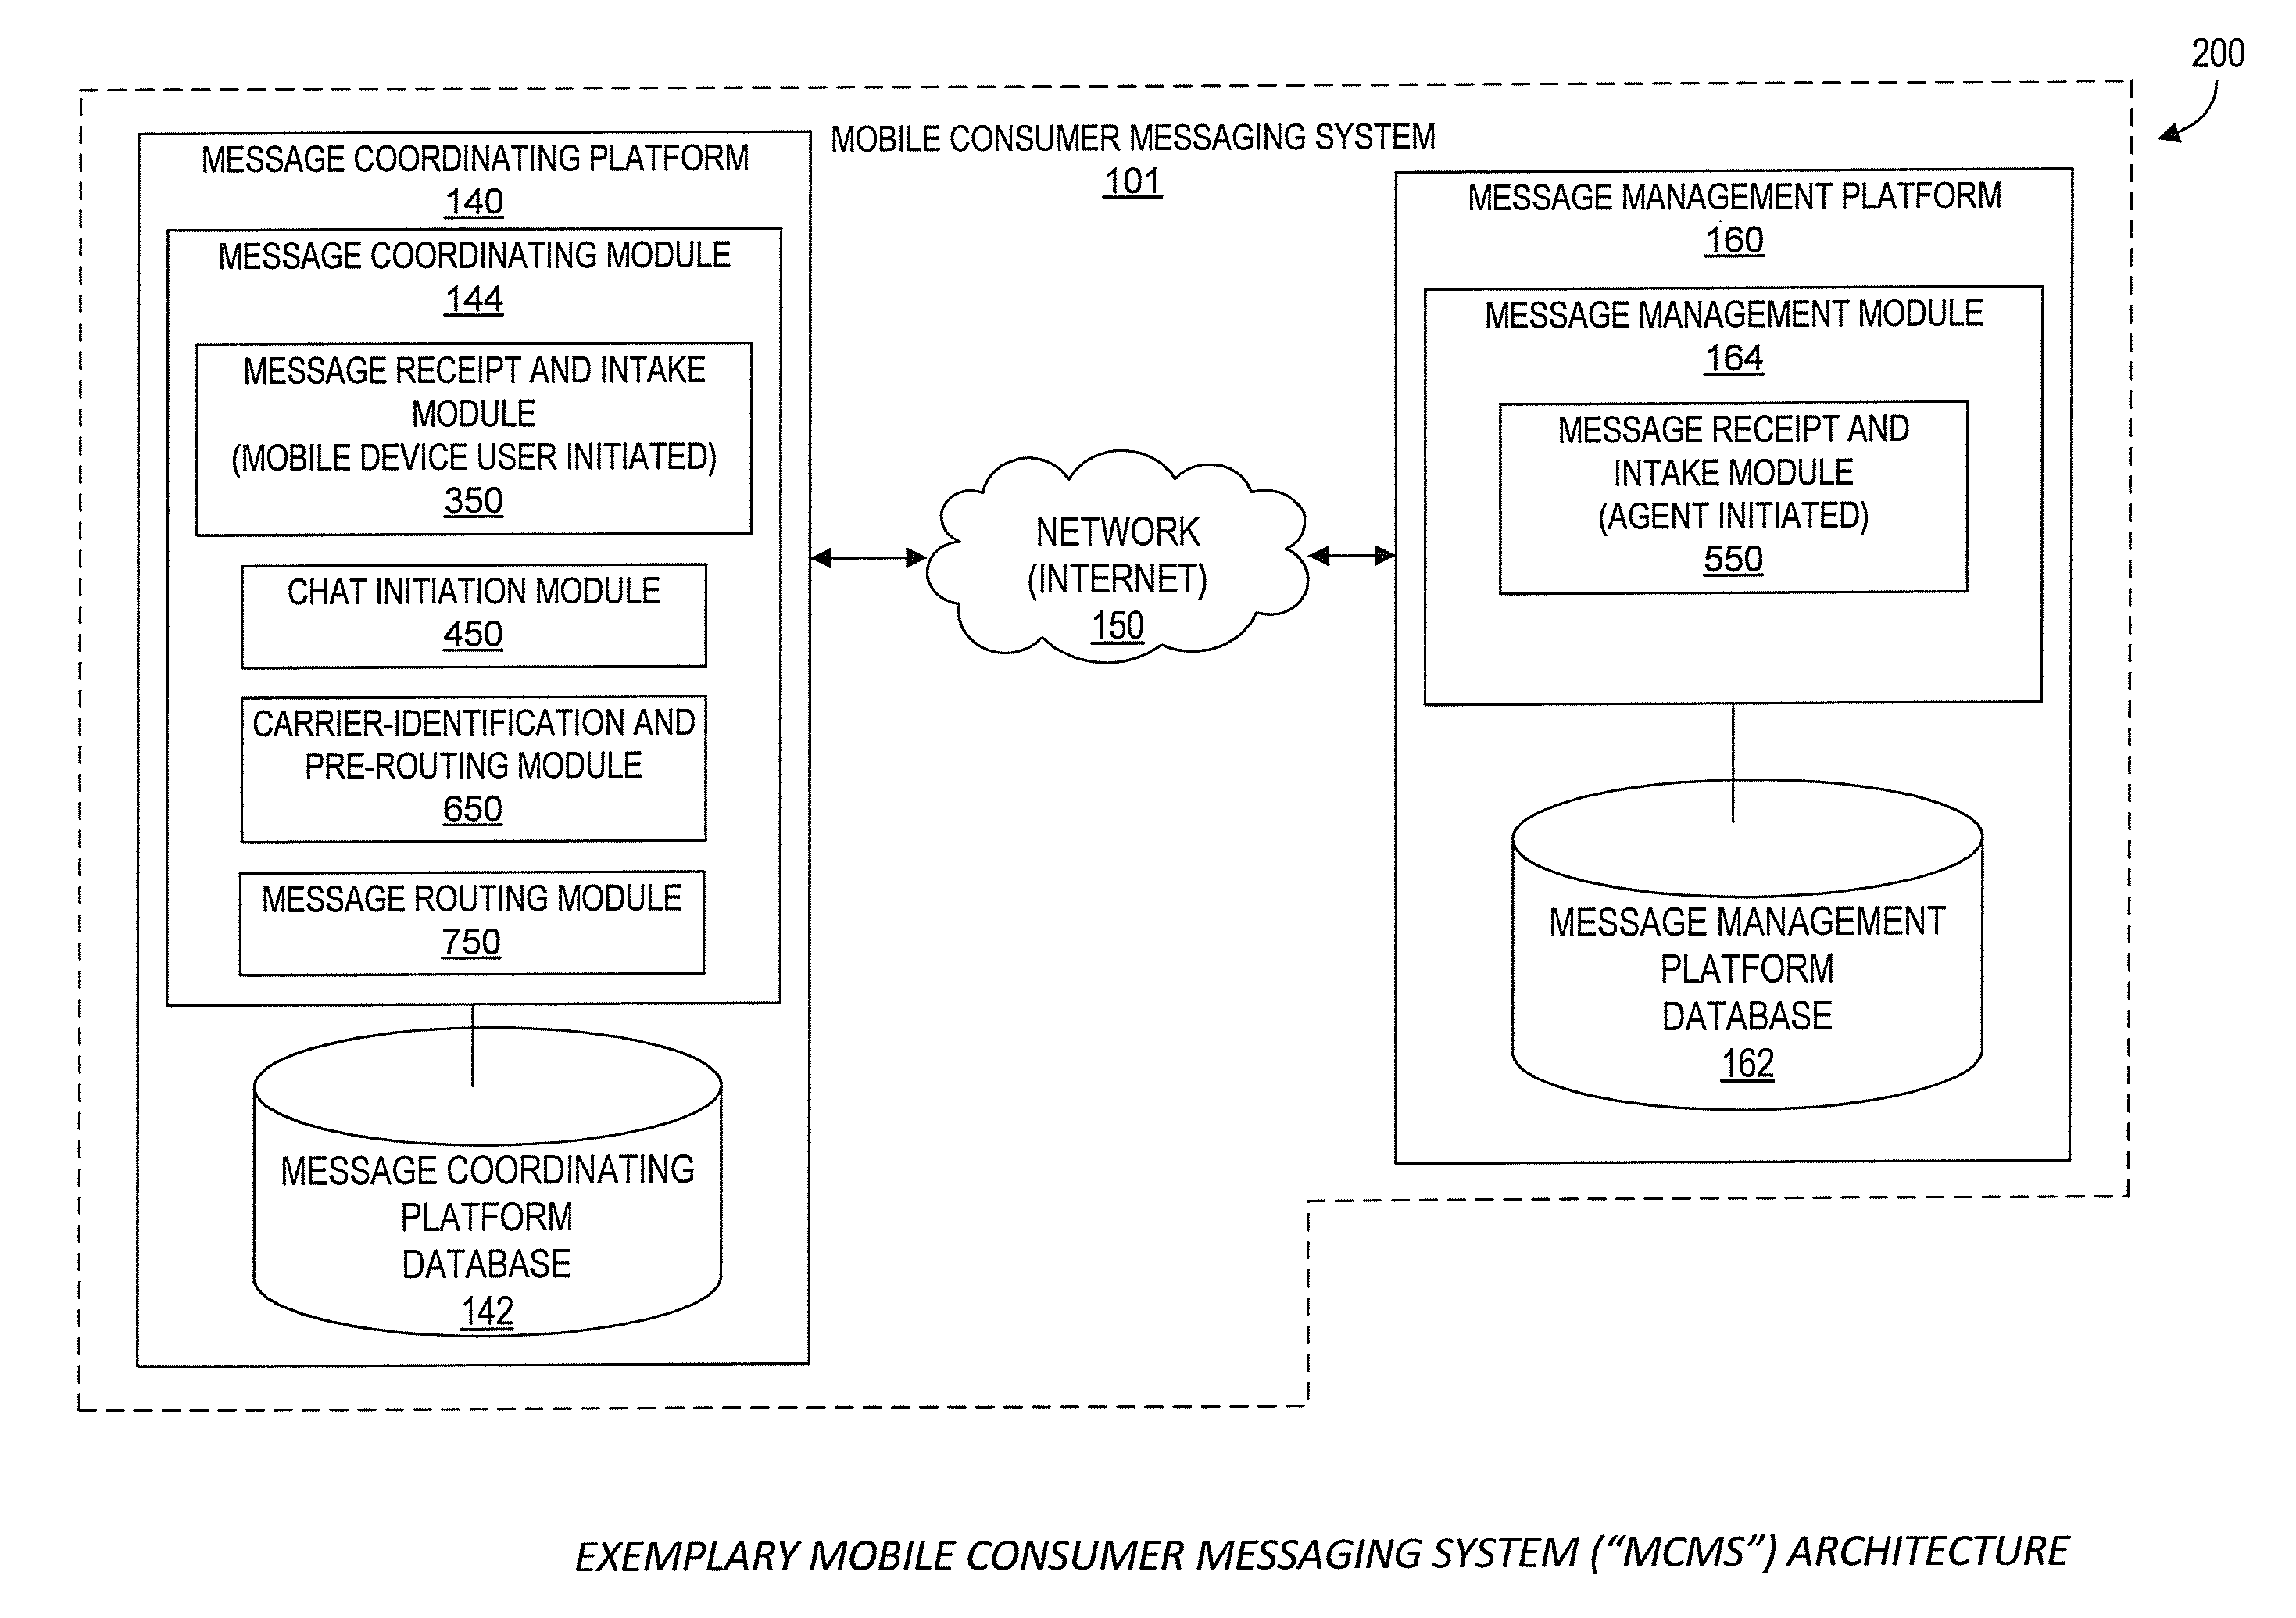 Systems and Methods for Performing Live Chat Functionality Via a Mobile Device